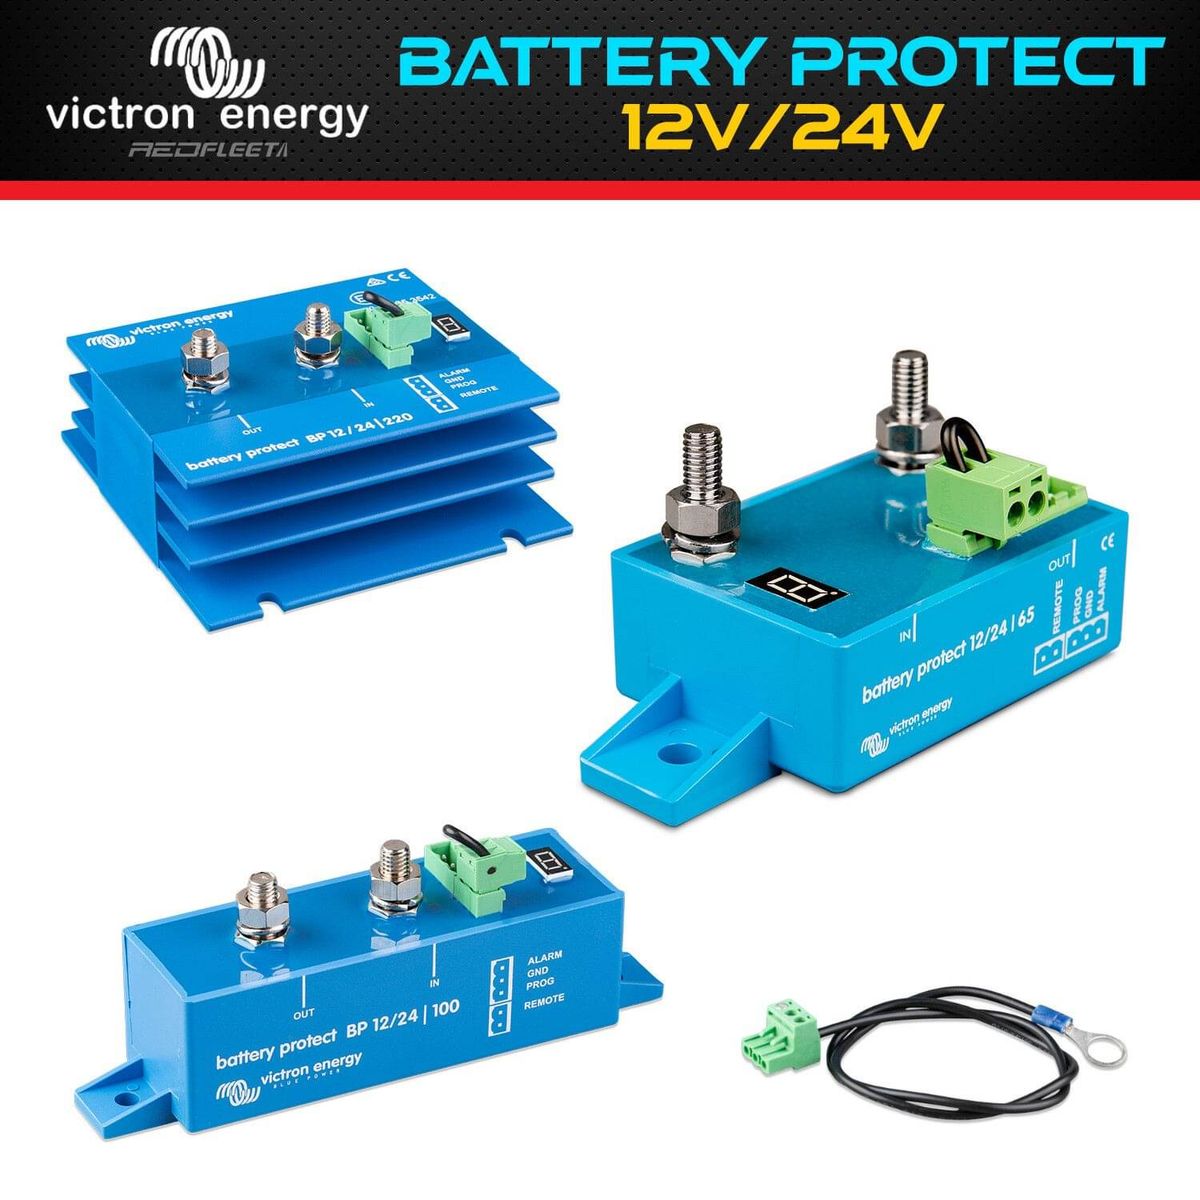 REDFLEET  VICTRON BATTERY PROTECT 12V/24V 65A Low Voltage Load Disconnect,  Power Management Systems